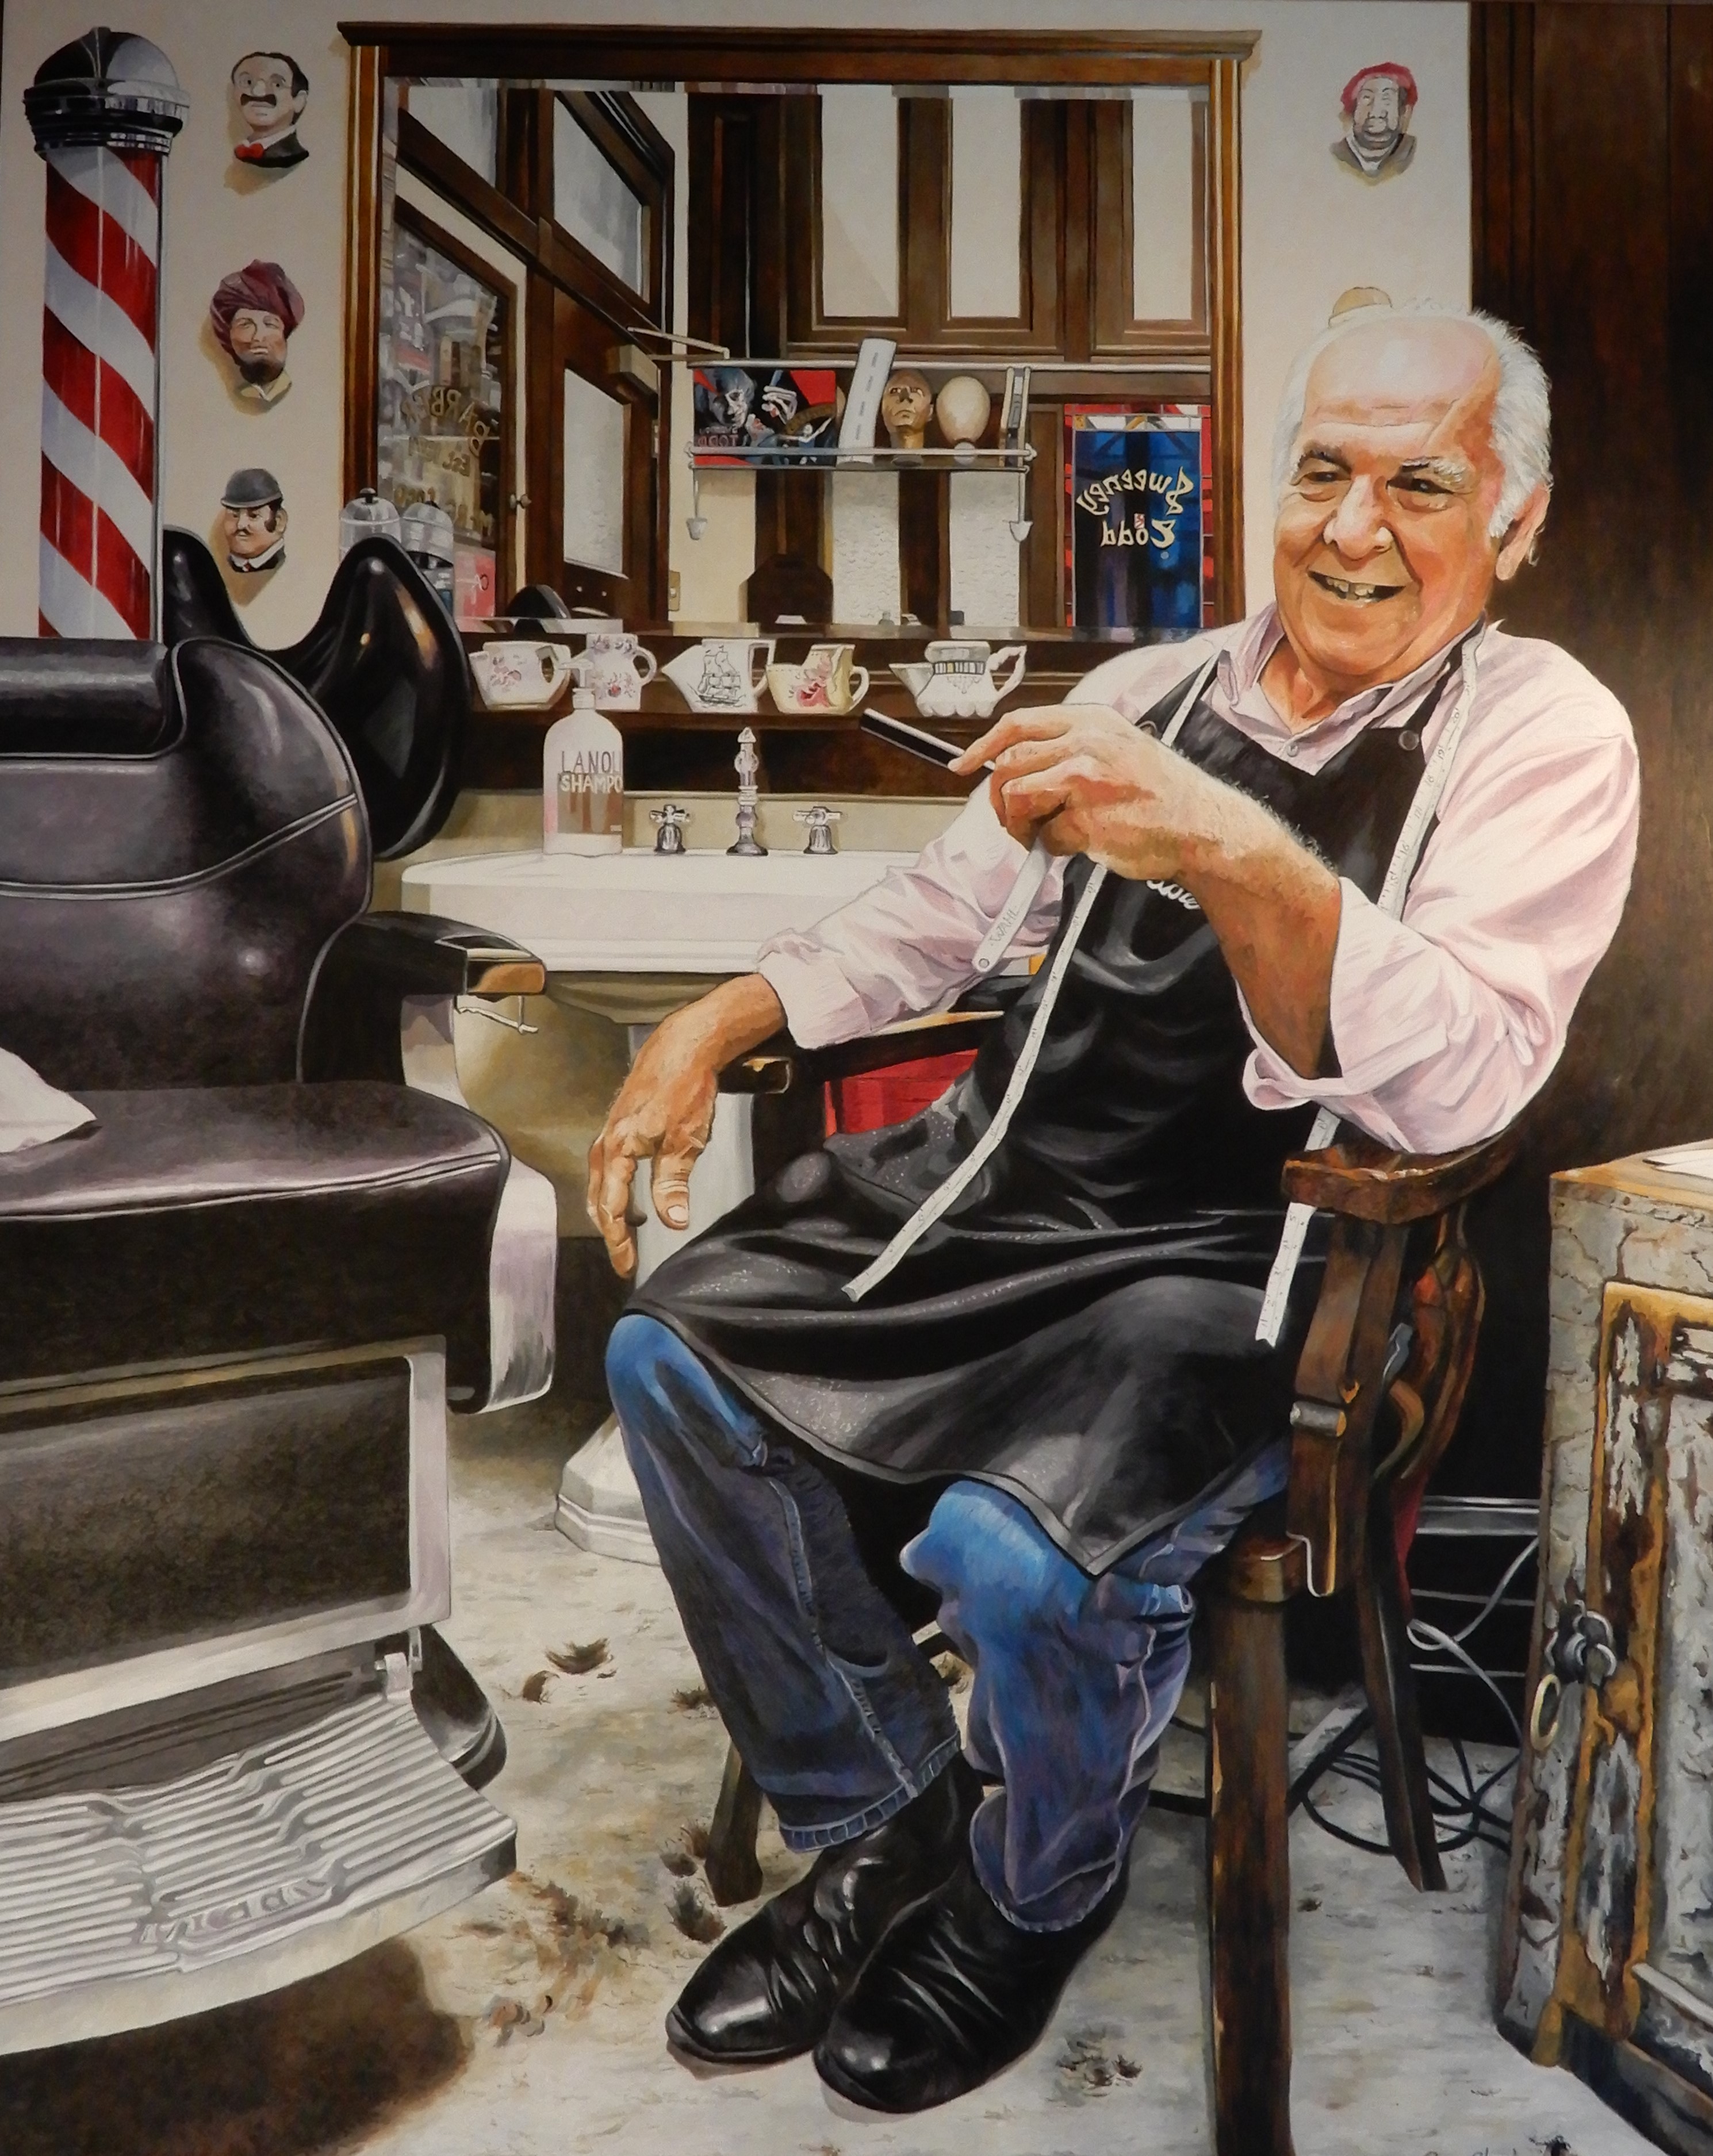  'The Godfather of the City's Barbers' 
Oil on Canvas 
120 cm x 150 cm  